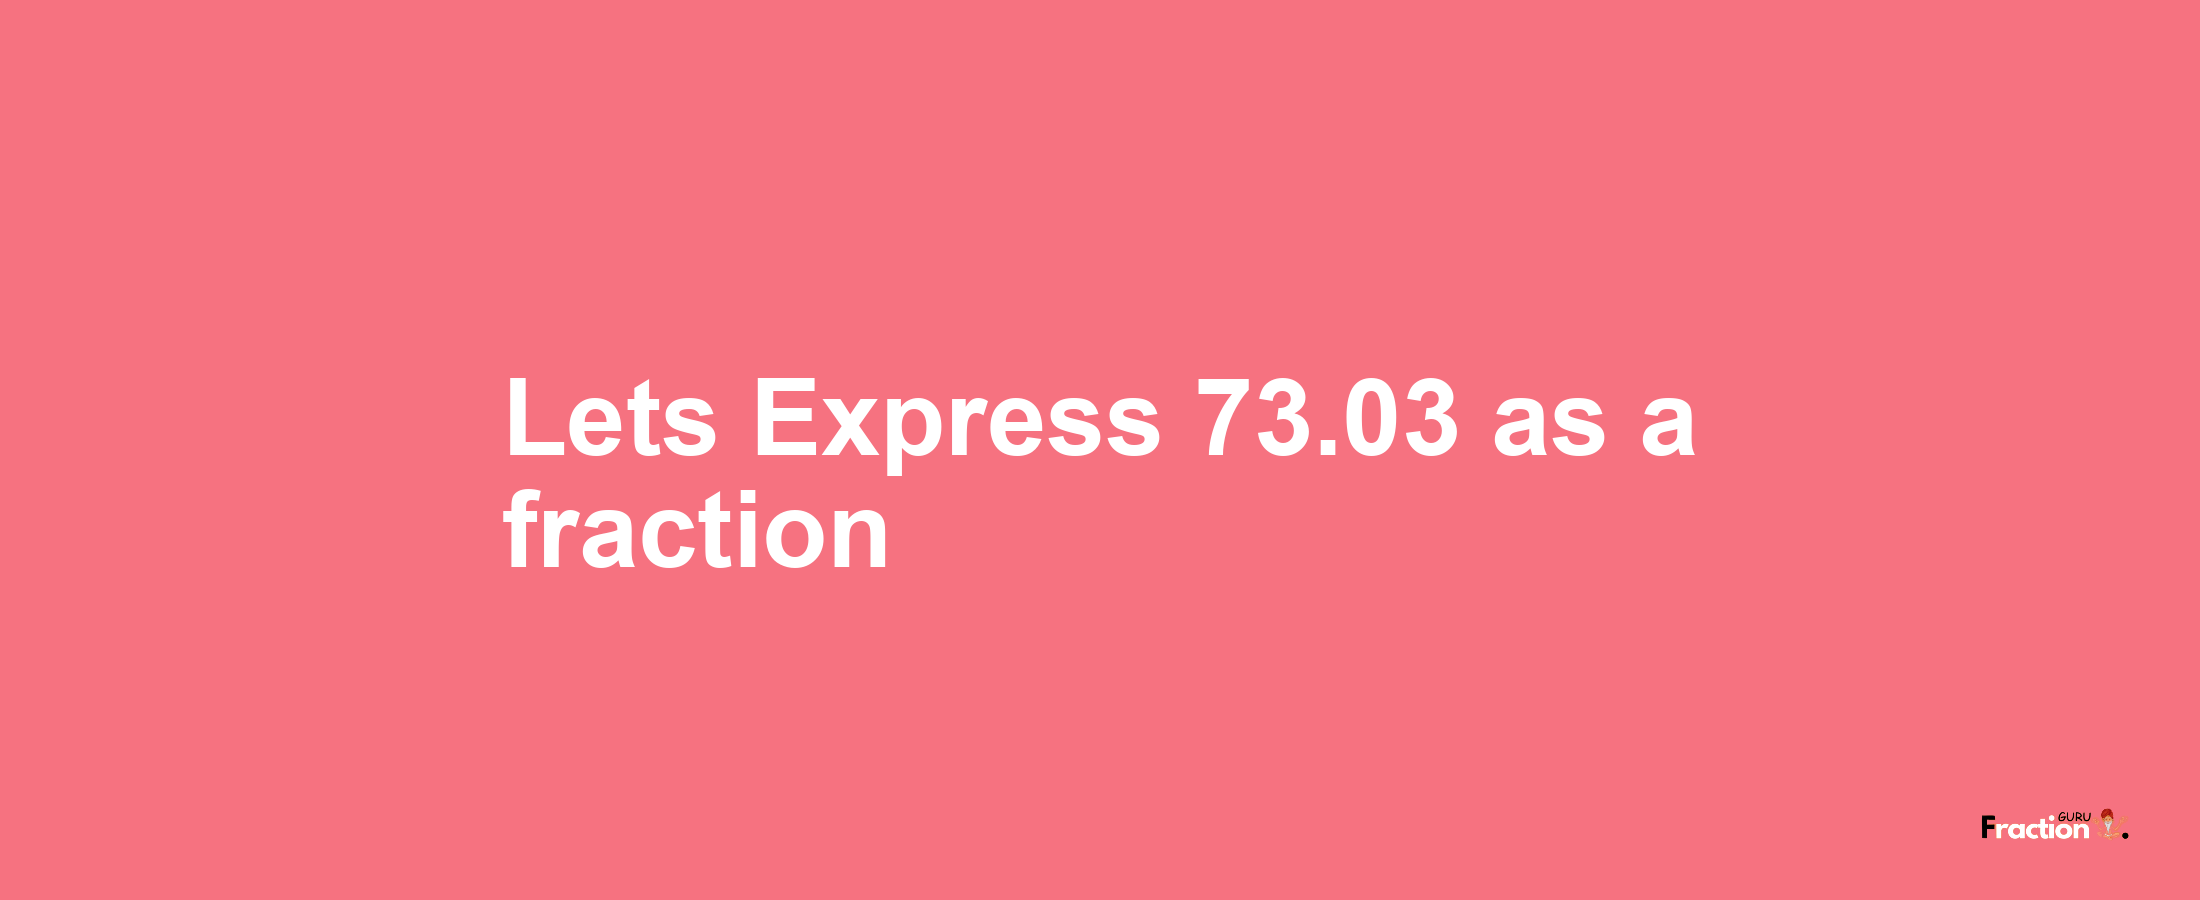 Lets Express 73.03 as afraction